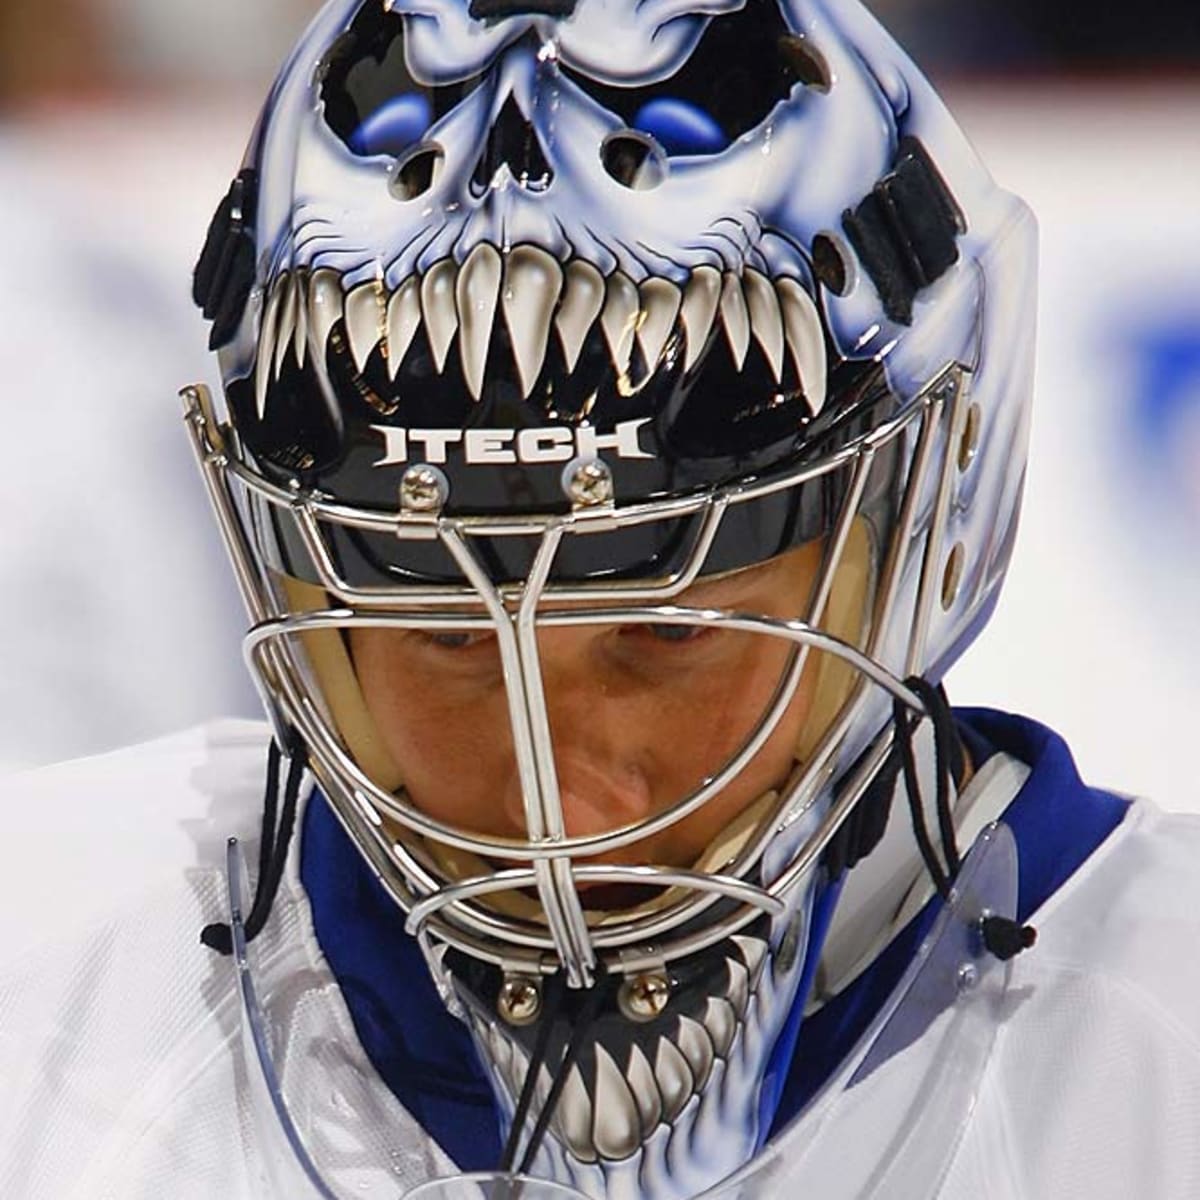 Nhl's Coolest Goalie Masks Pictures Gallery - Getty Images